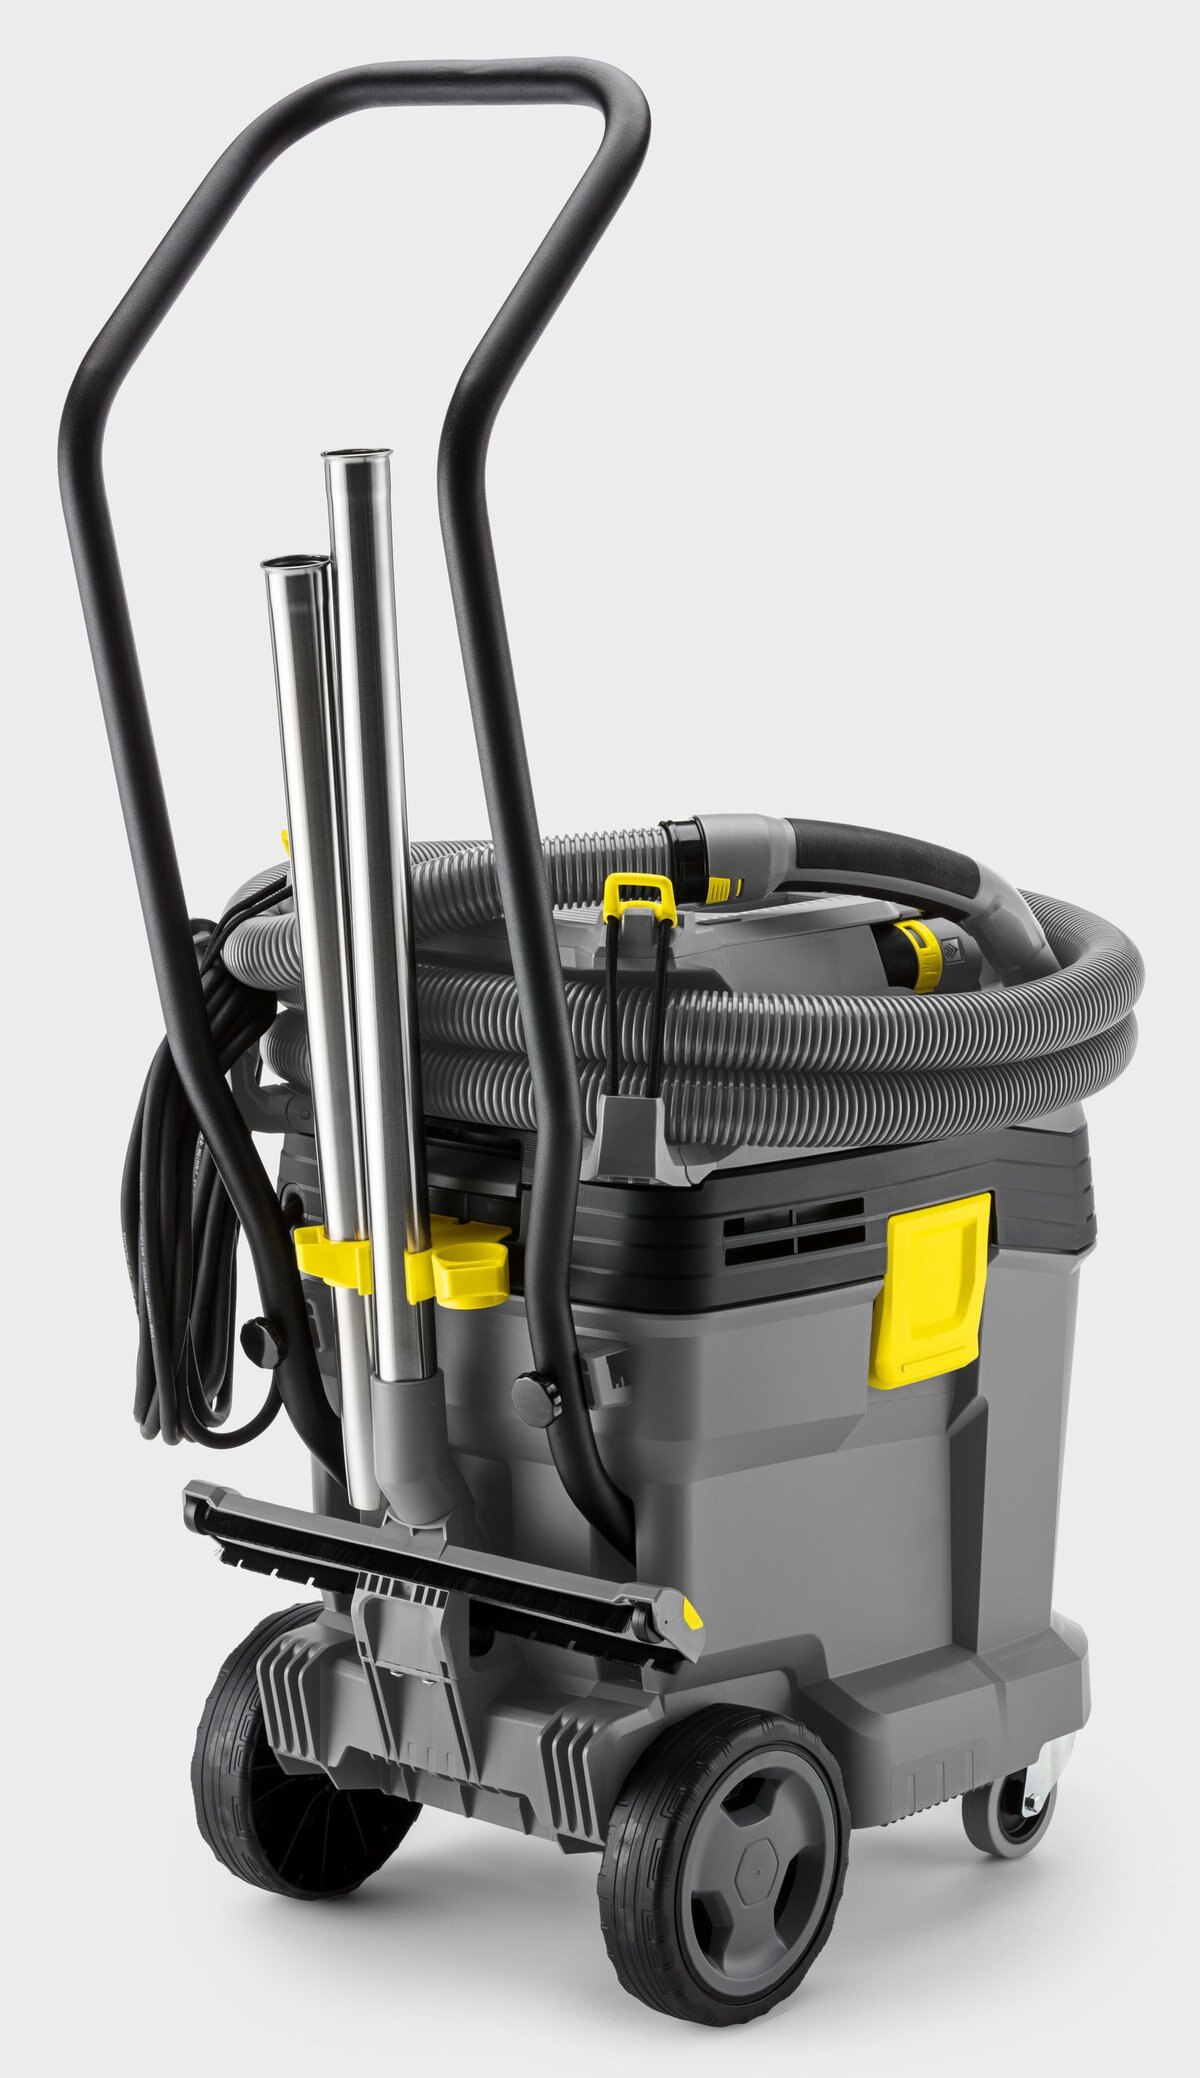 Karcher WET AND DRY VACUUM CLEANER NT 40/1 Tact Te L